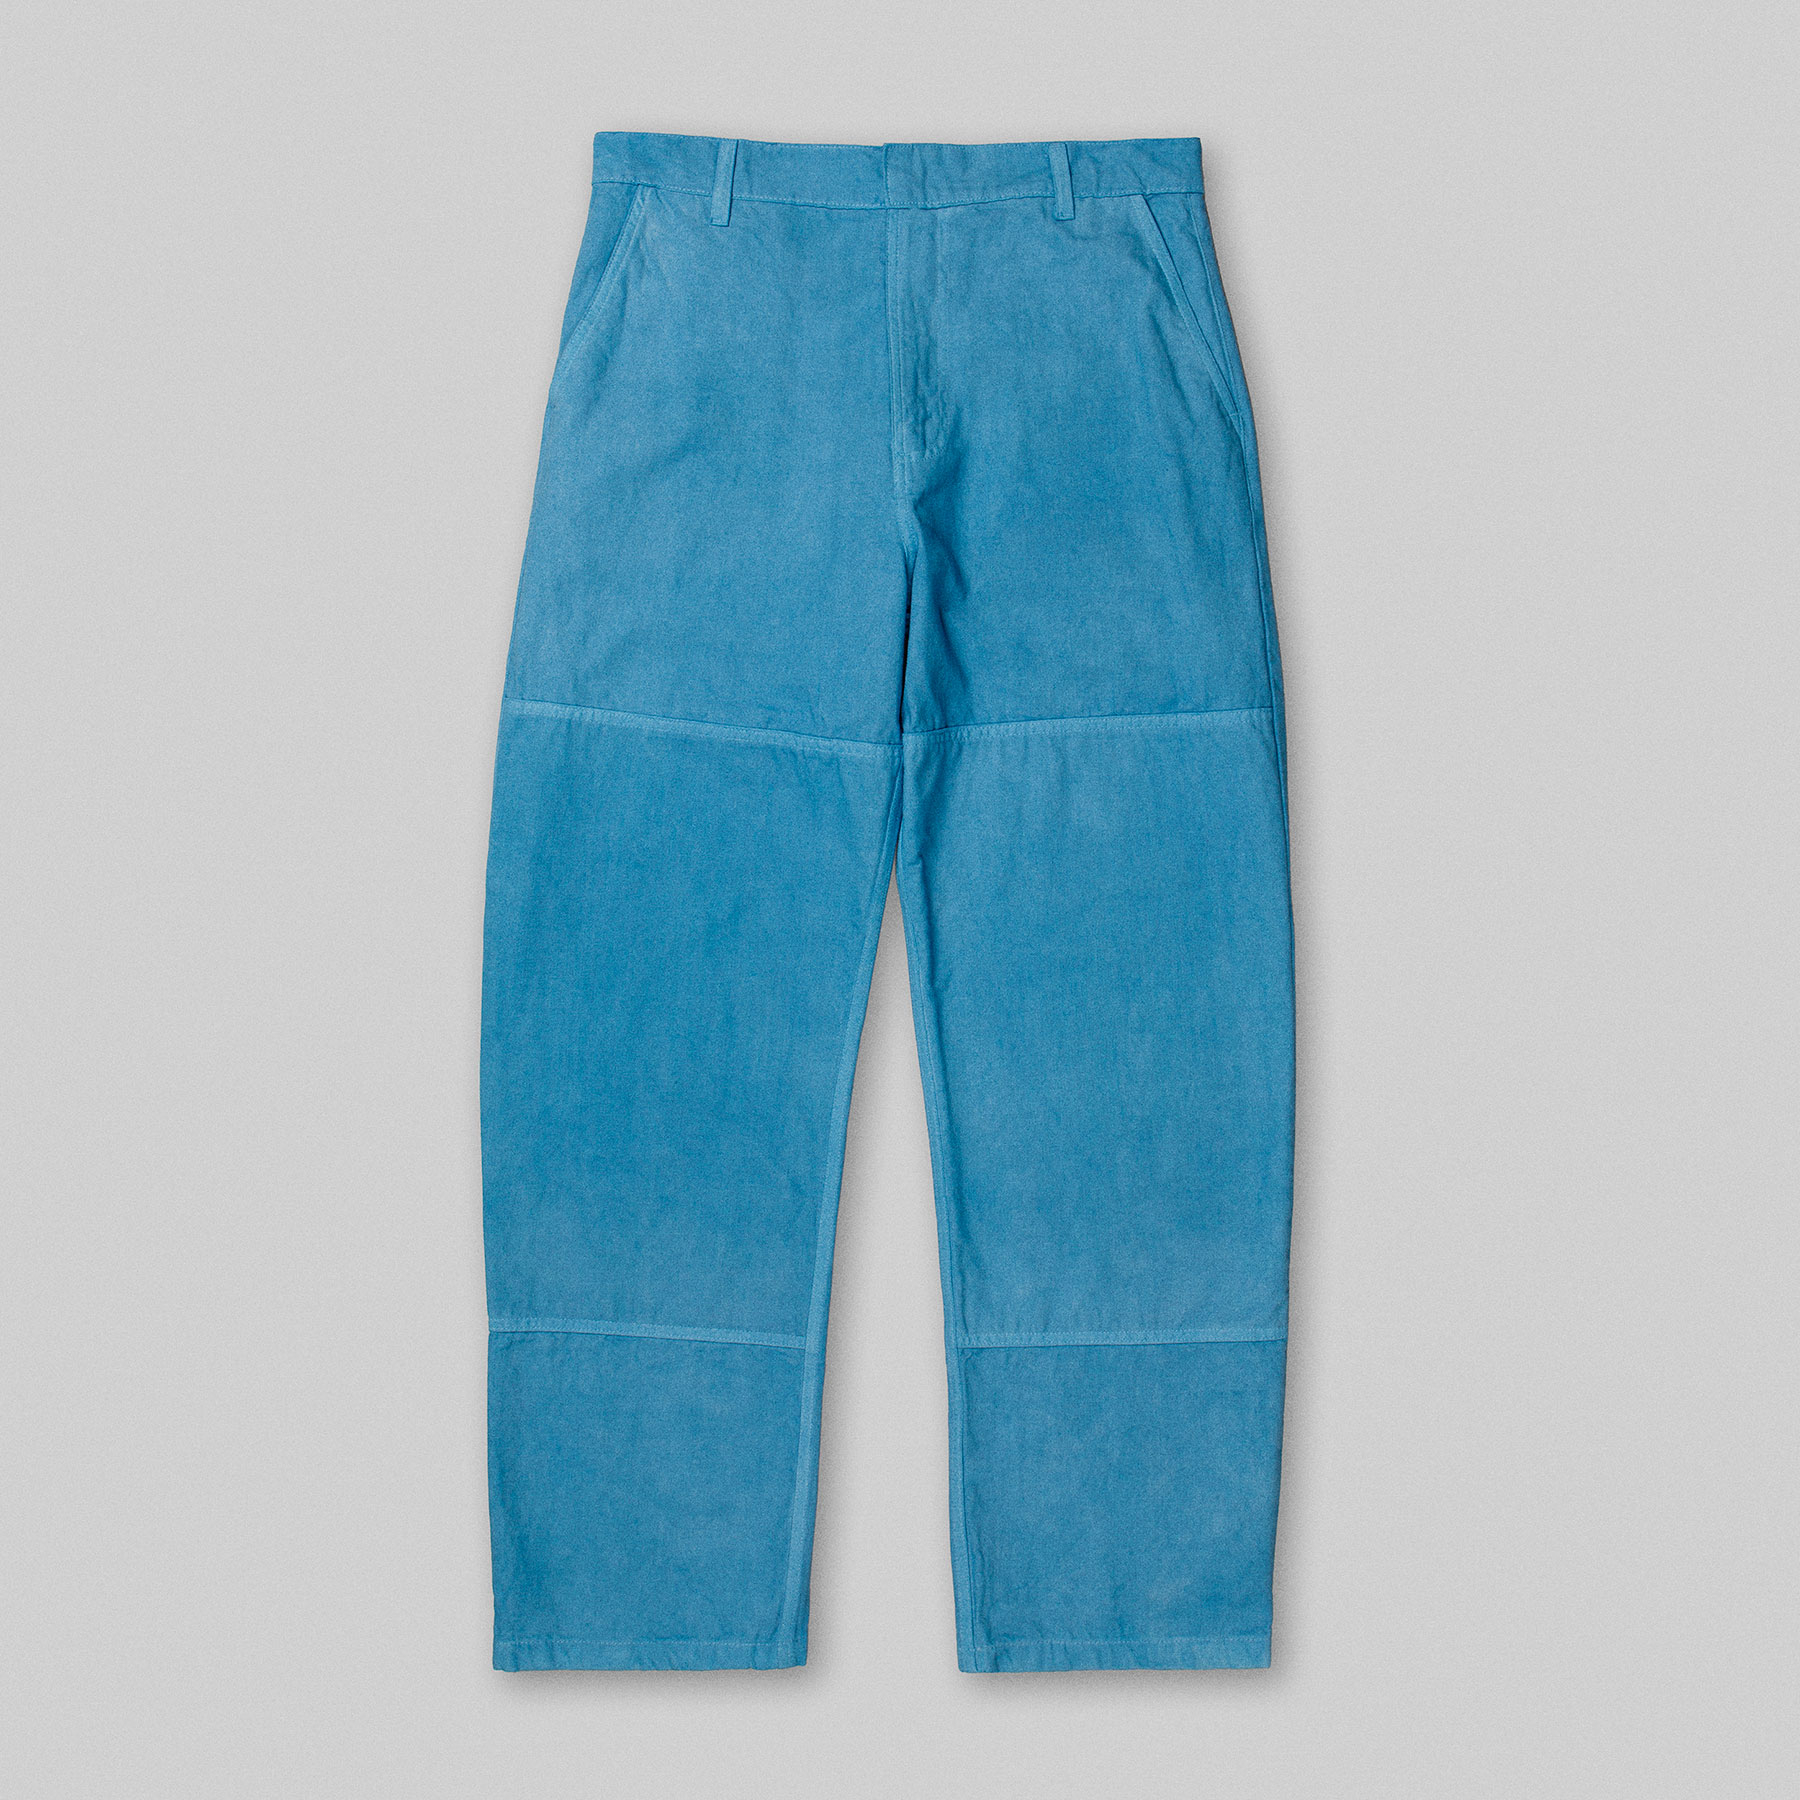 4 POCKET Pants by Arpenteur in Ice woad color